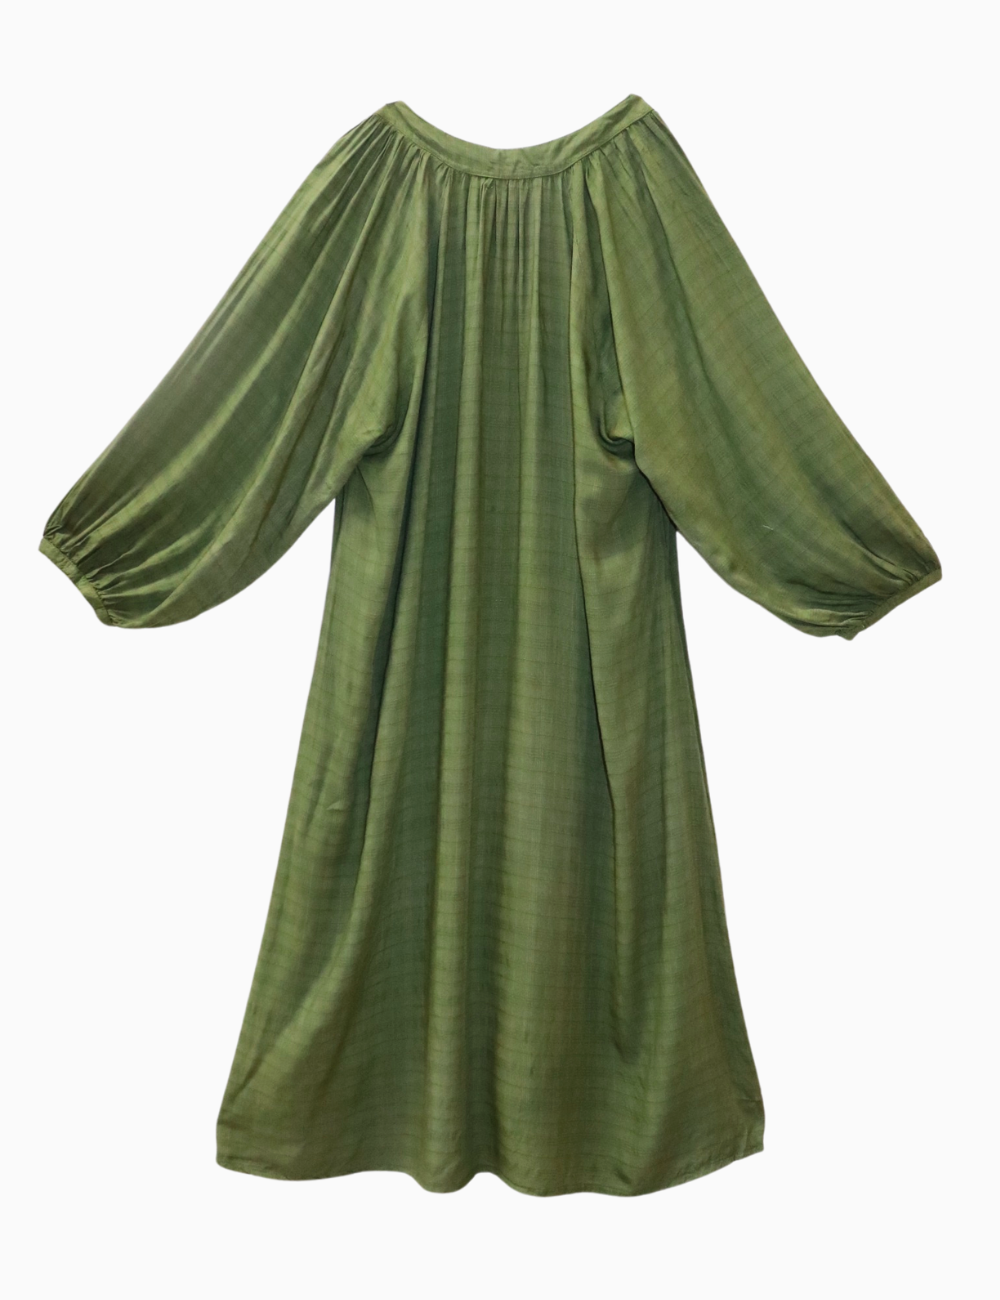 
                  
                    product photo from back of flores organic sugarcane dress in forest green on white background
                  
                